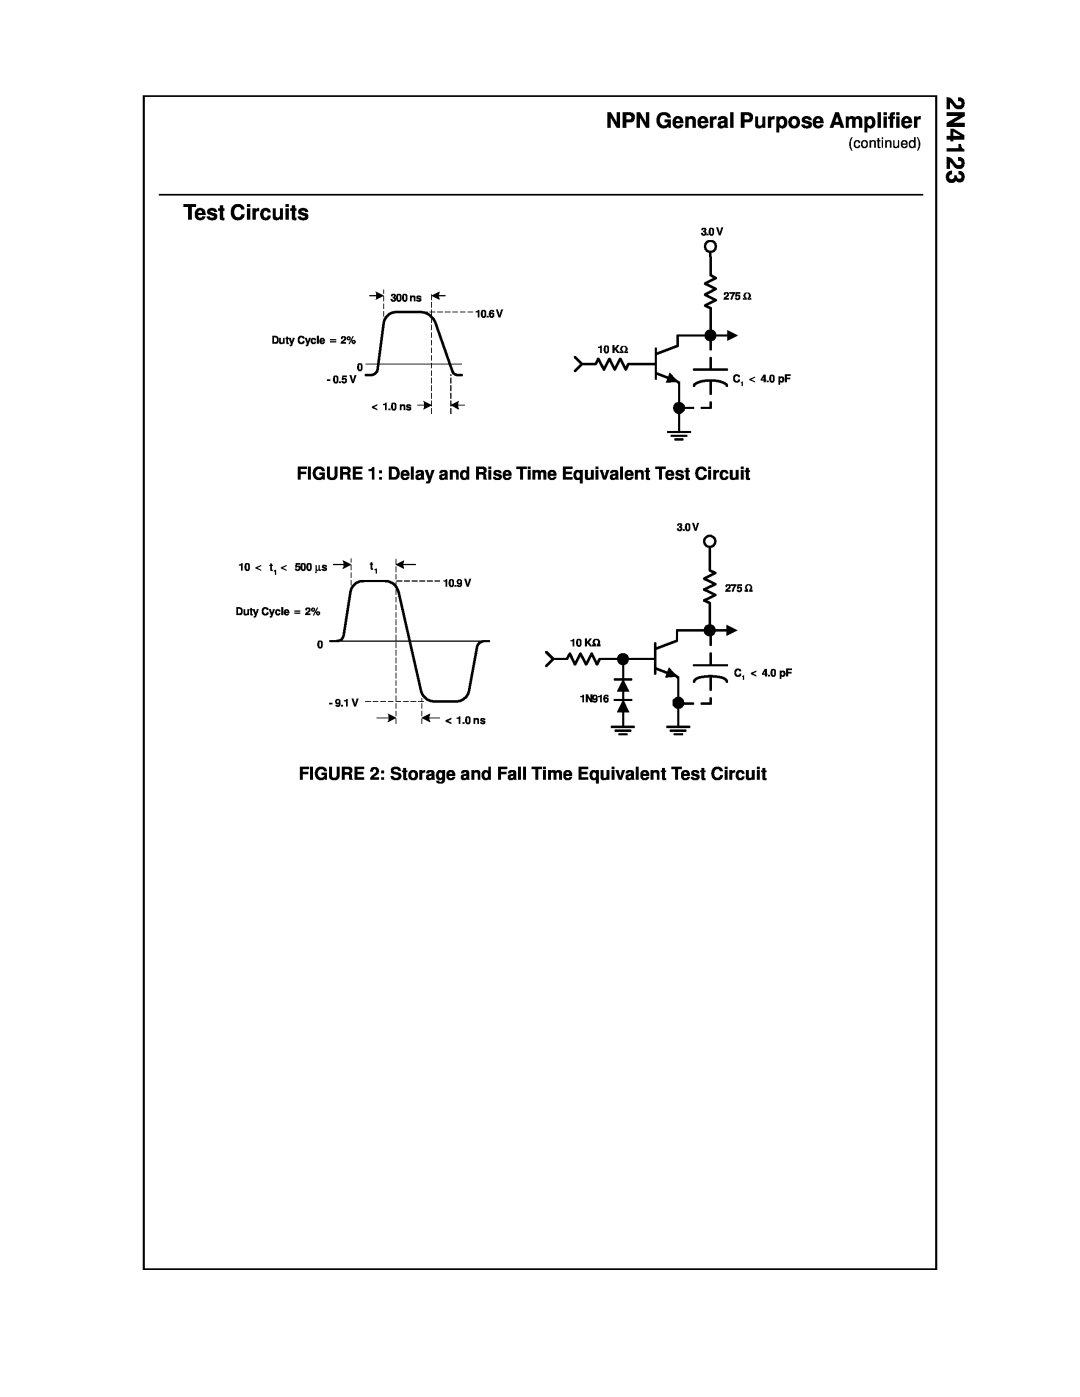 Fairchild 2N4123 Test Circuits, Delay and Rise Time Equivalent Test Circuit, Storage and Fall Time Equivalent Test Circuit 